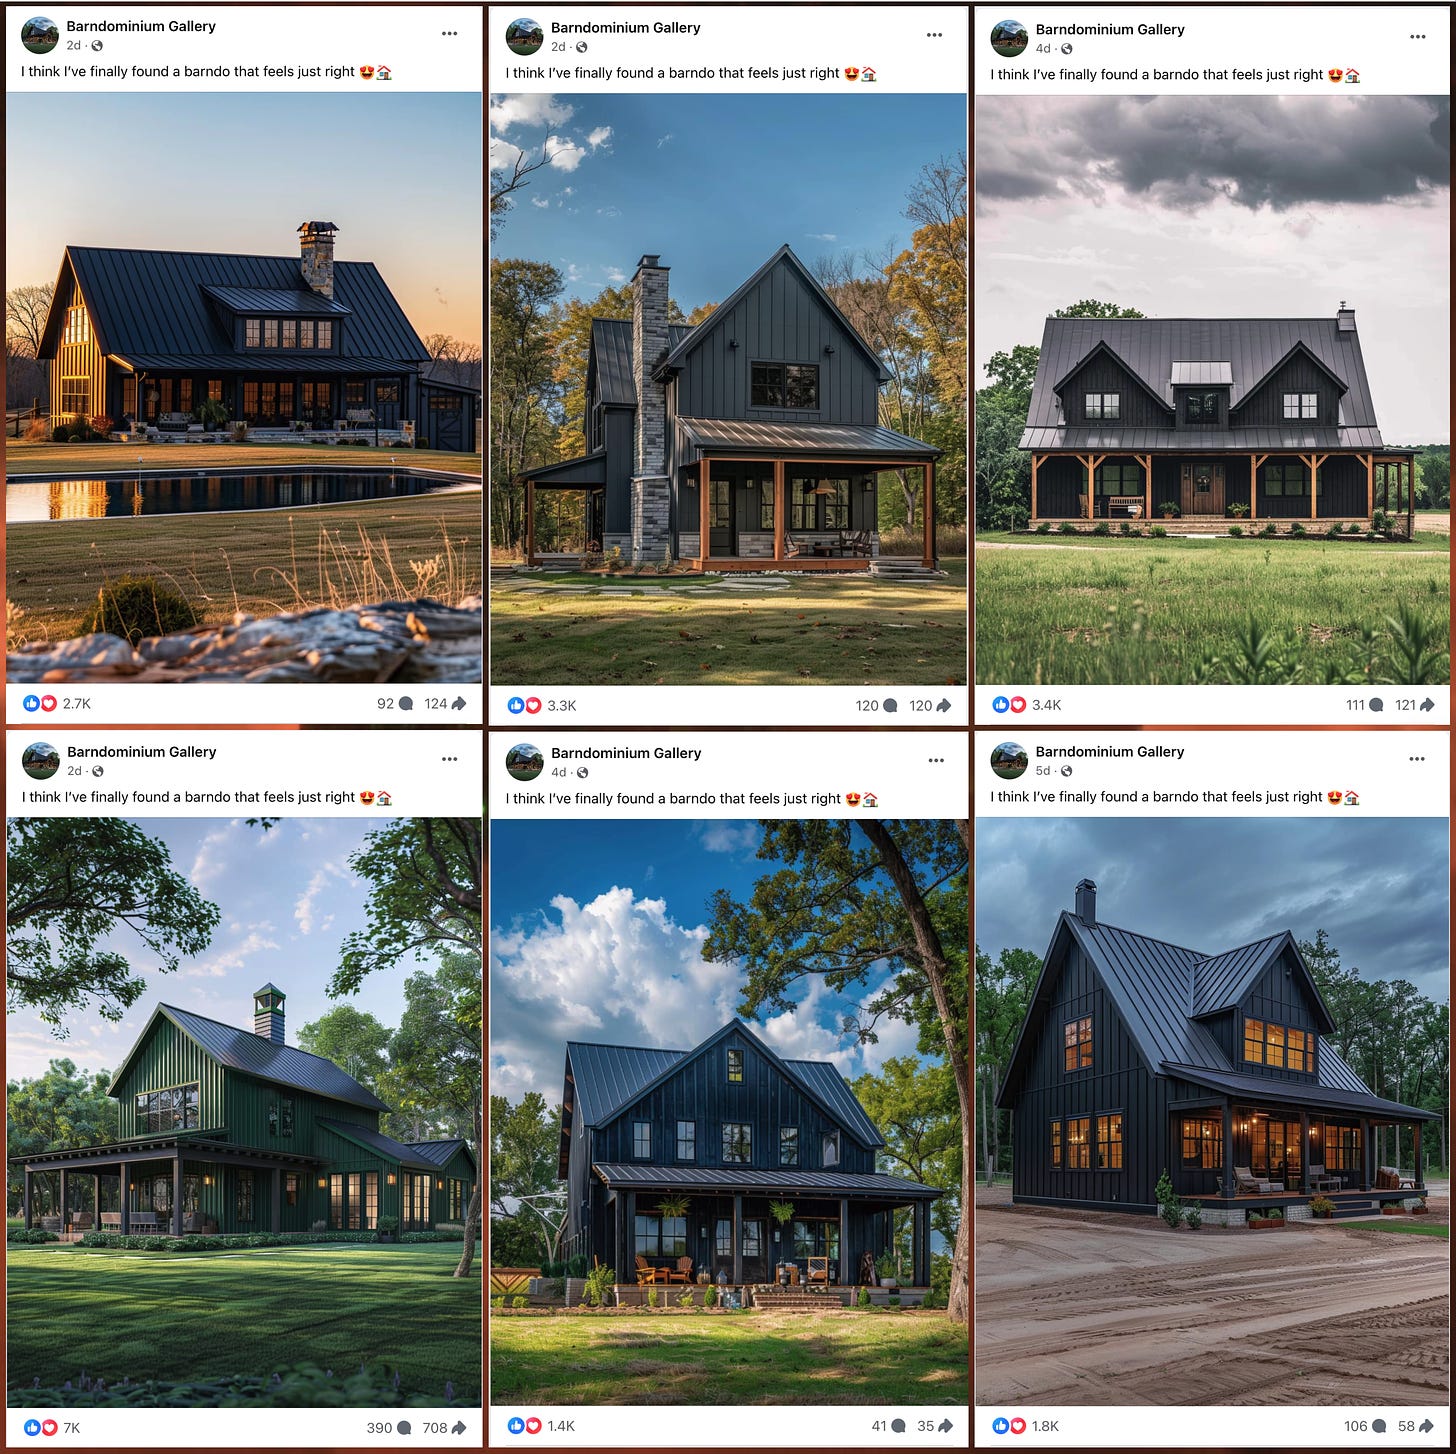 screenshots of six Facebook posts with the text "I think I've finally found a barndo that feels just right" and an AI-generated image of a house